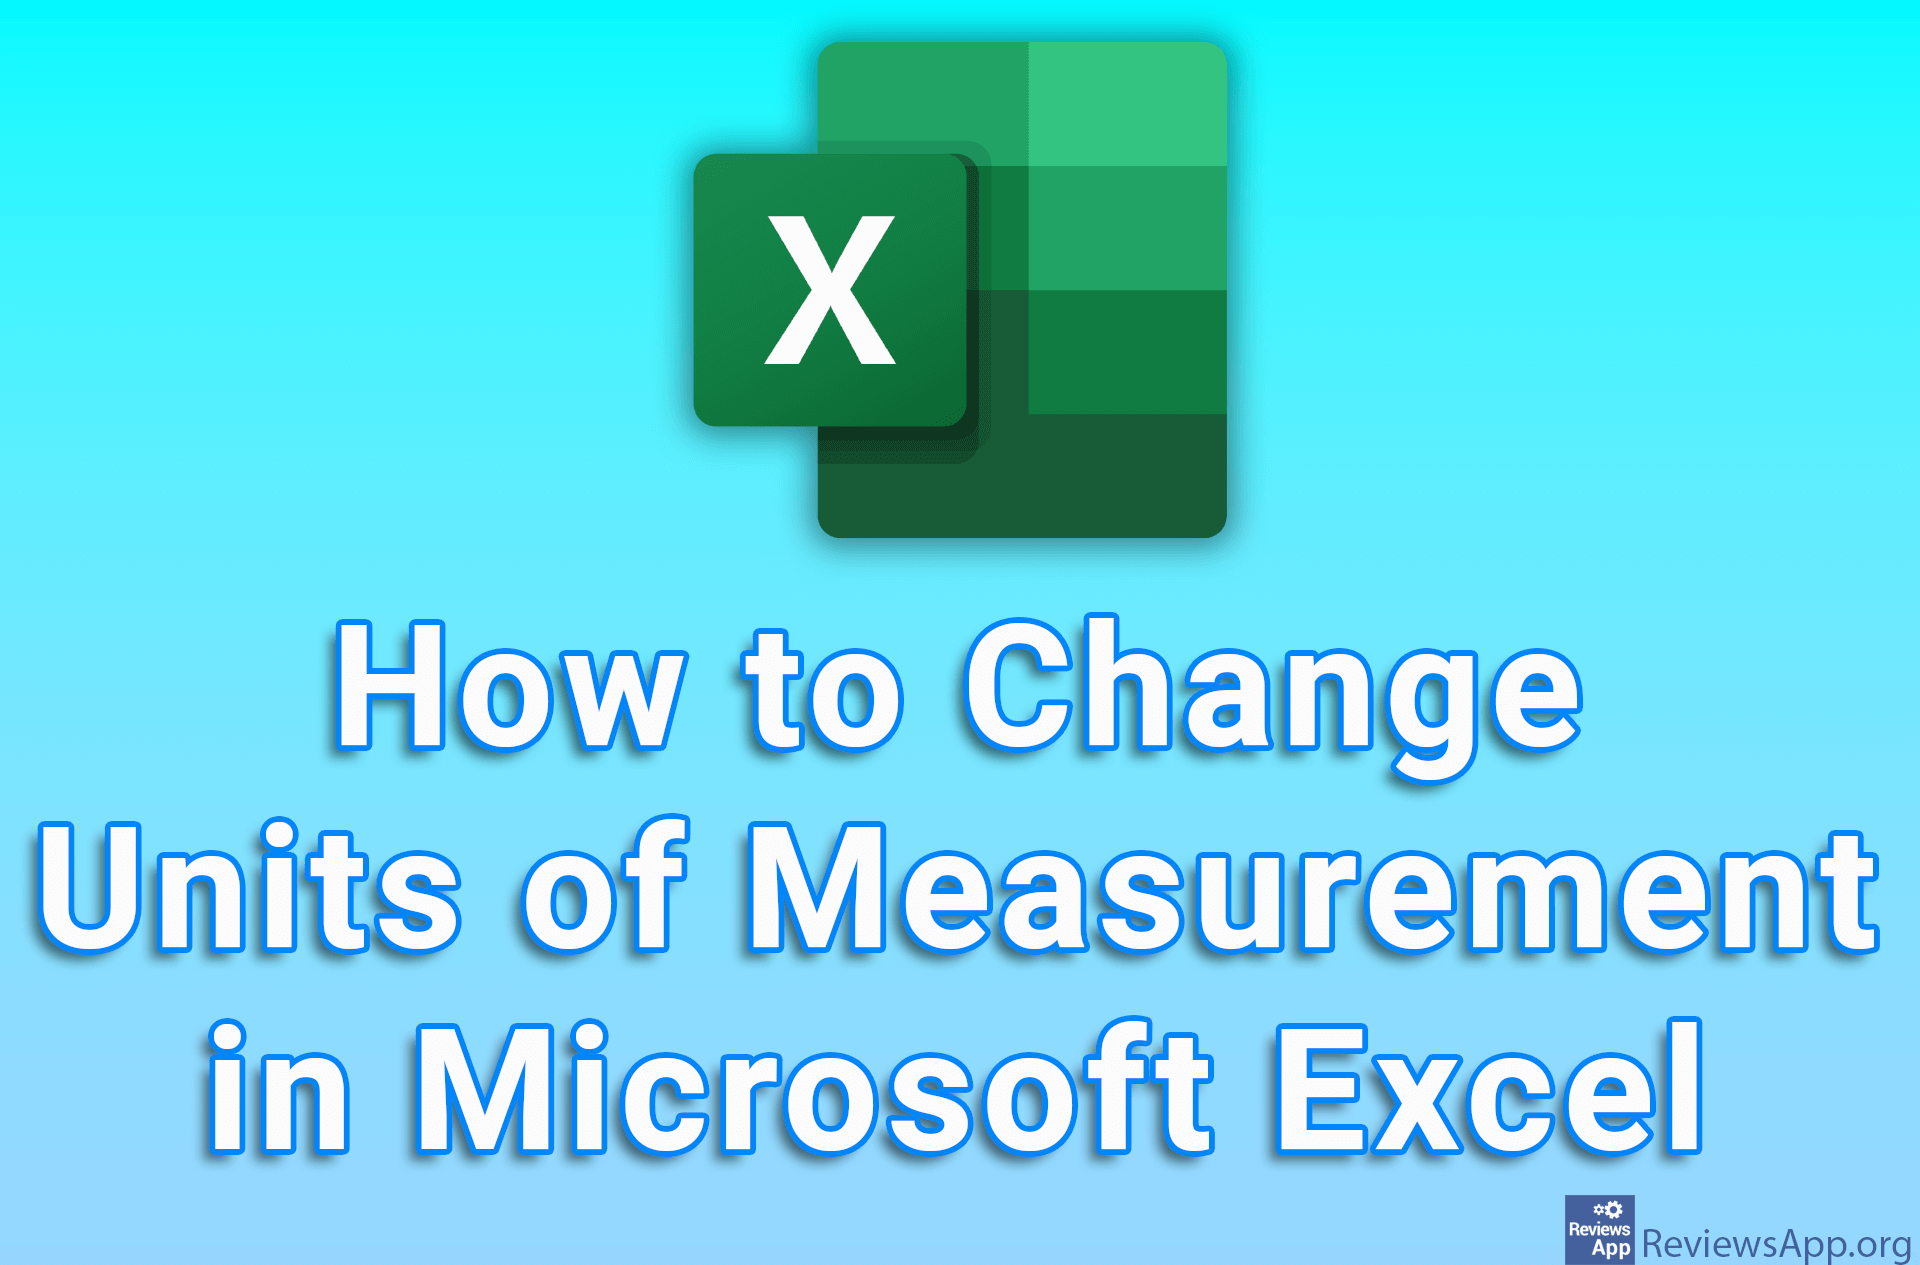 How to Change Units of Measurement in Microsoft Excel